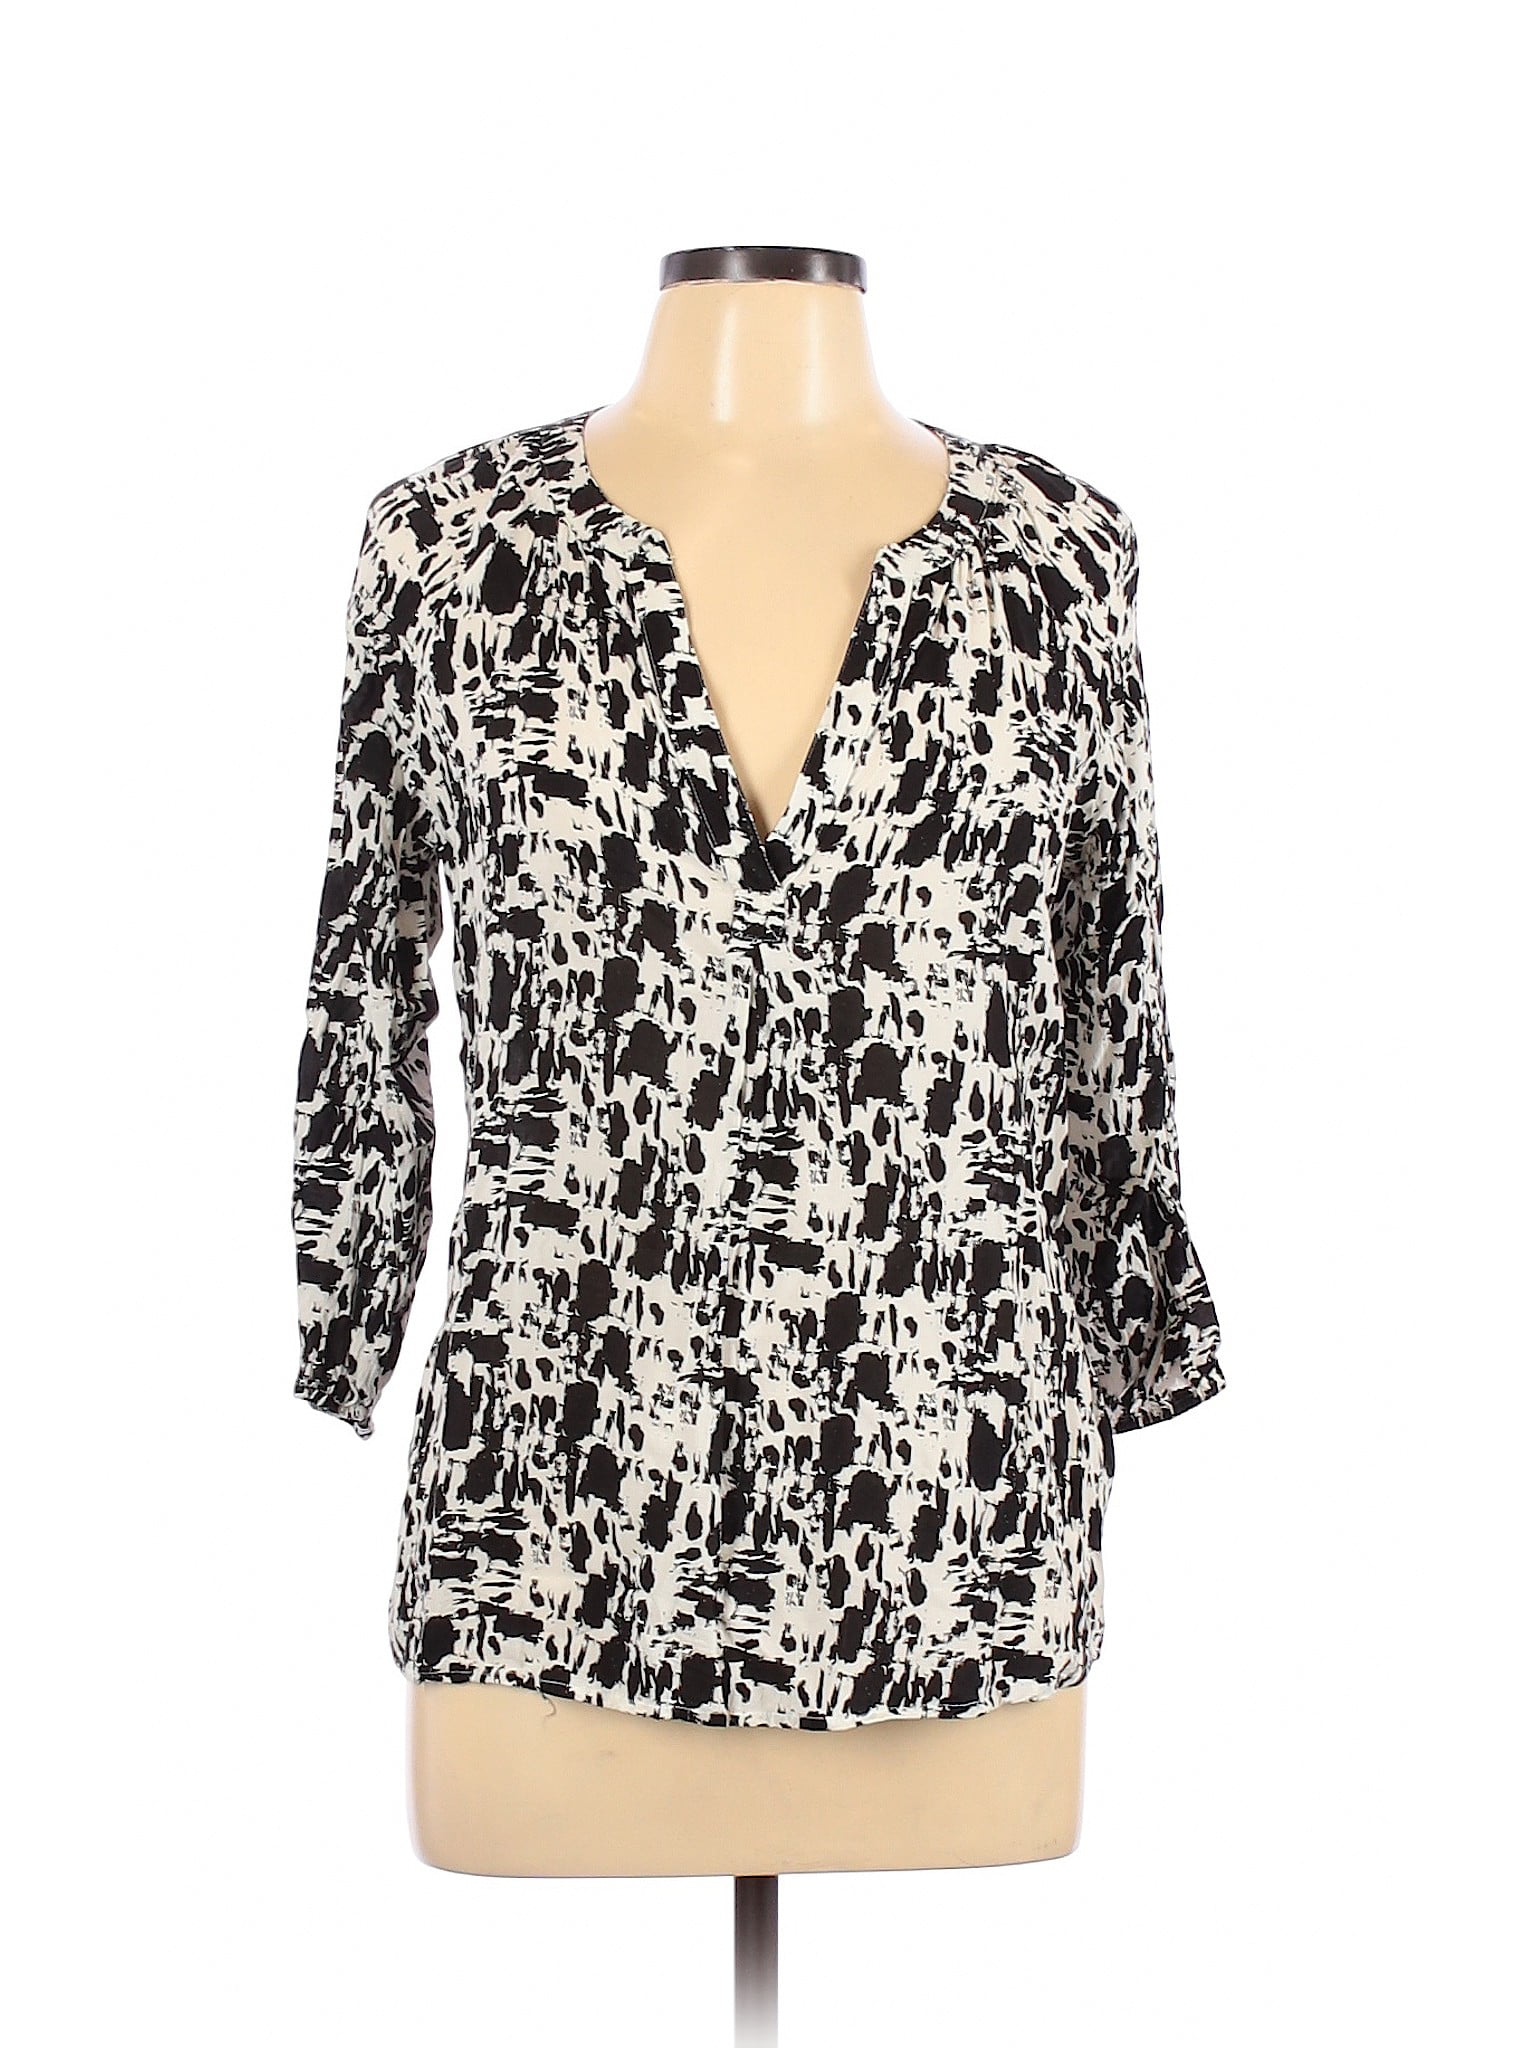 Gap Outlet - Pre-Owned Gap Outlet Women's Size L 3/4 Sleeve Blouse ...